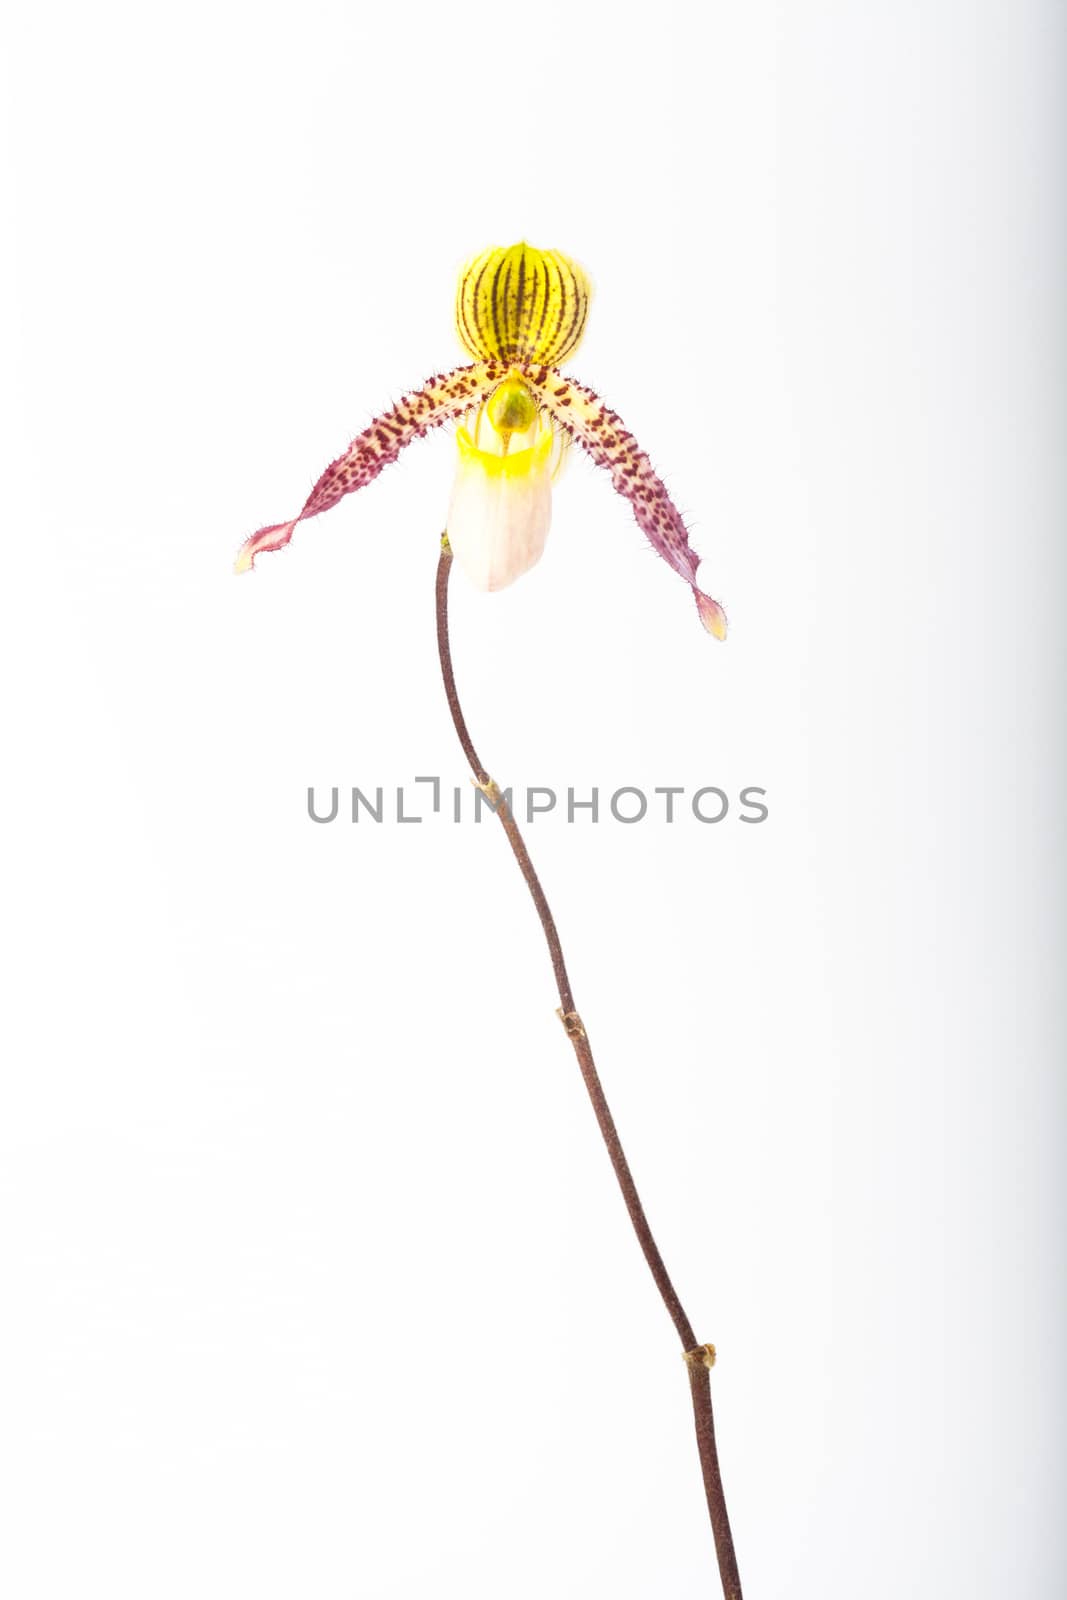 Paphiopedilum orchids by jee1999